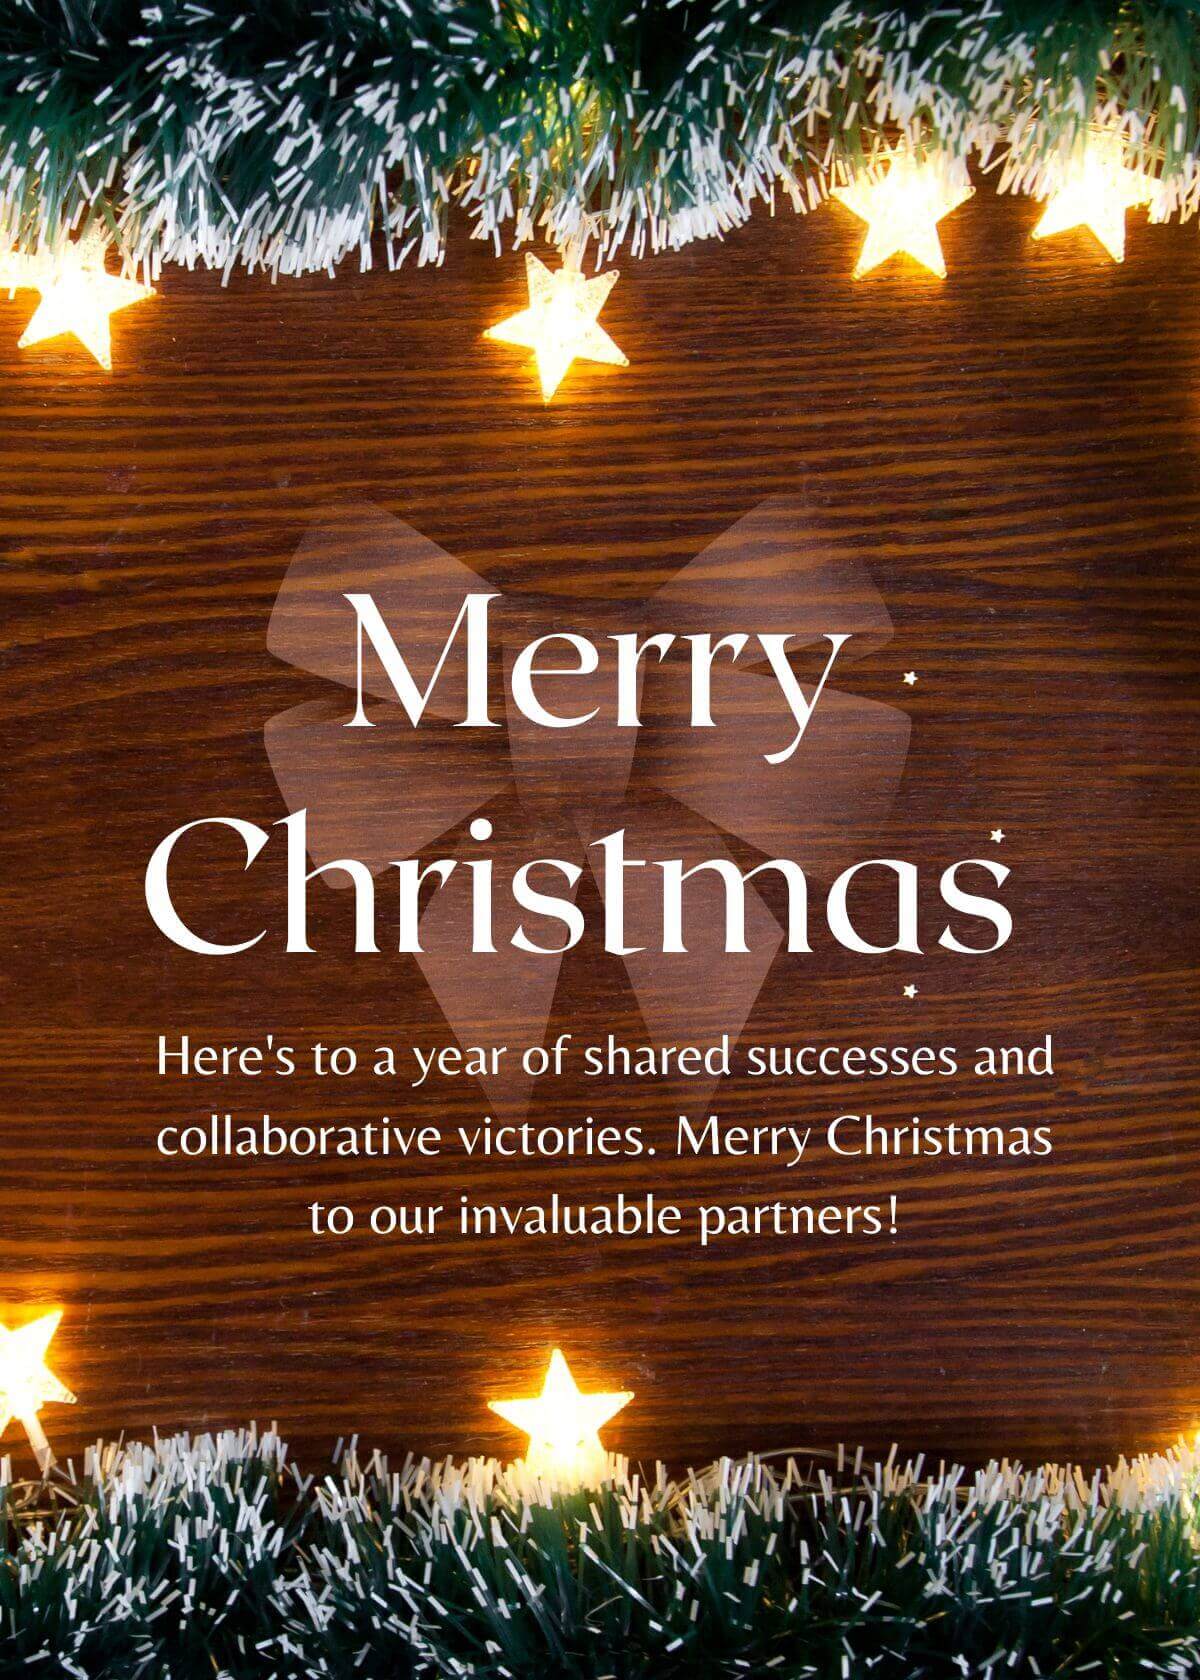 Merry Christmas Message To Business Partner